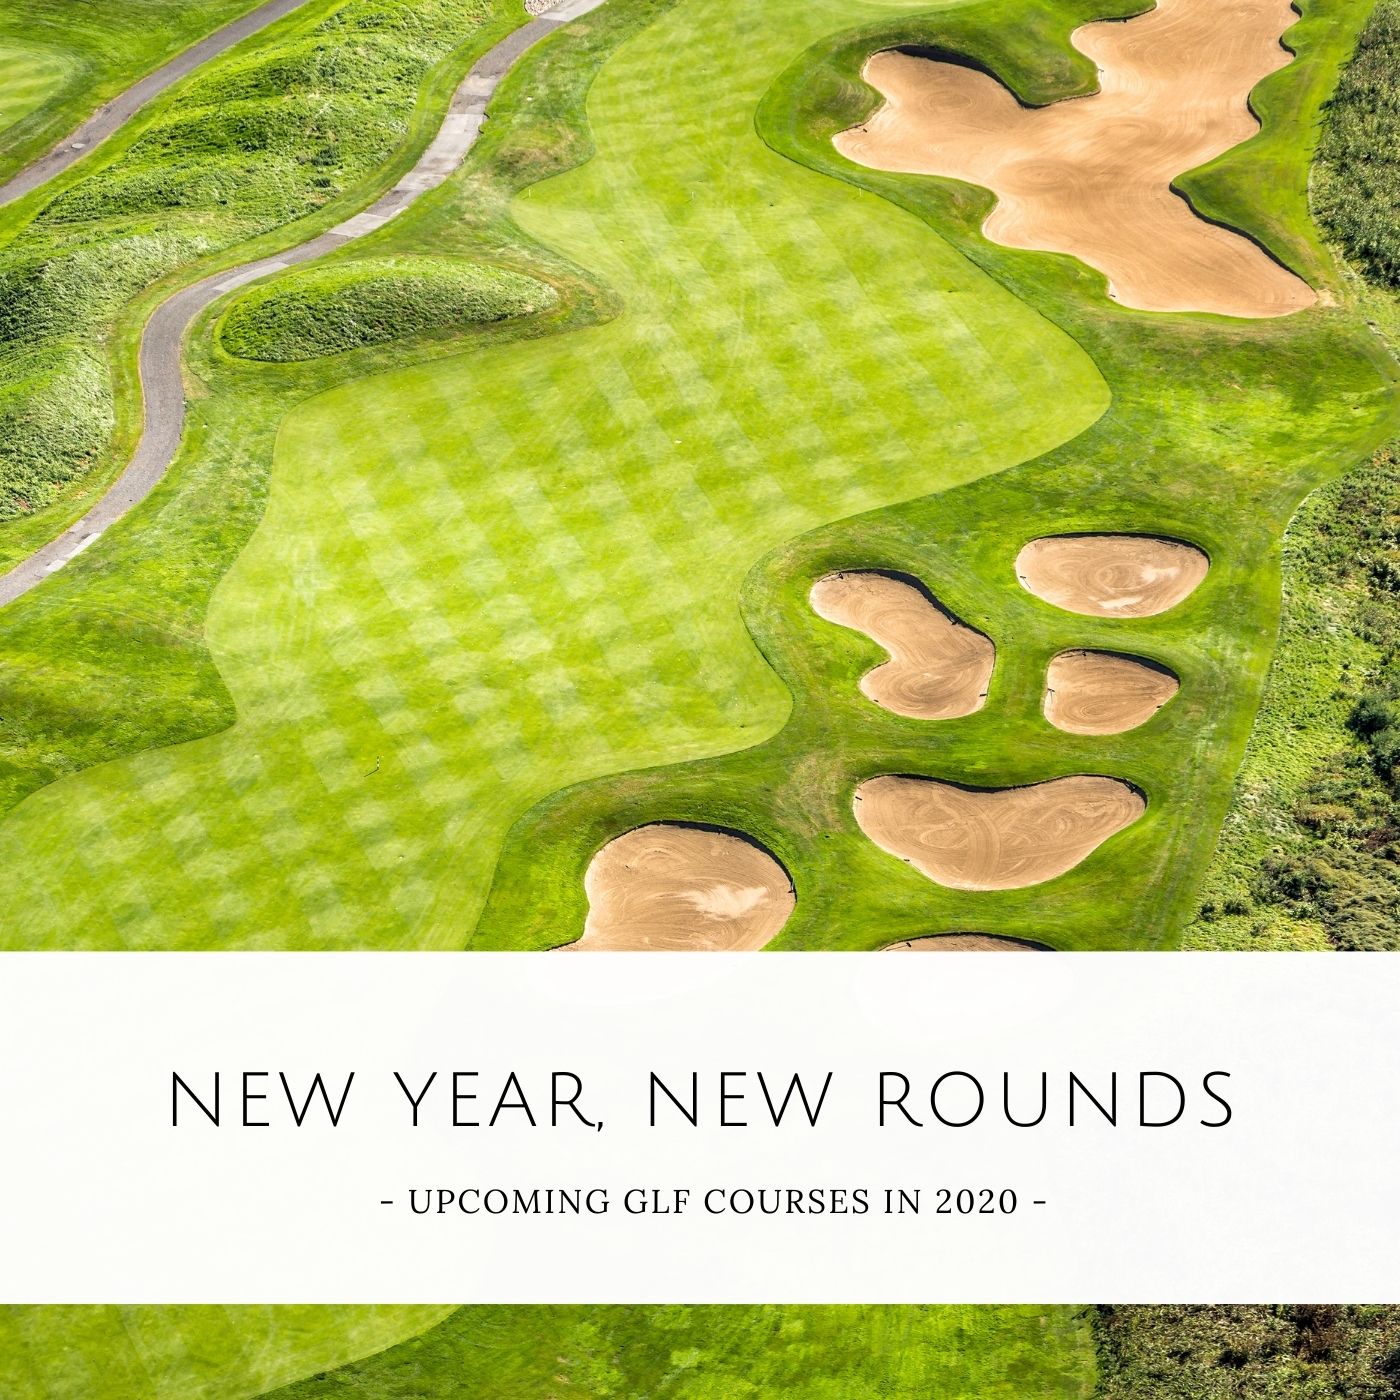 New Year, New Rounds! Exciting New Golf Courses Expected to Open in 2020